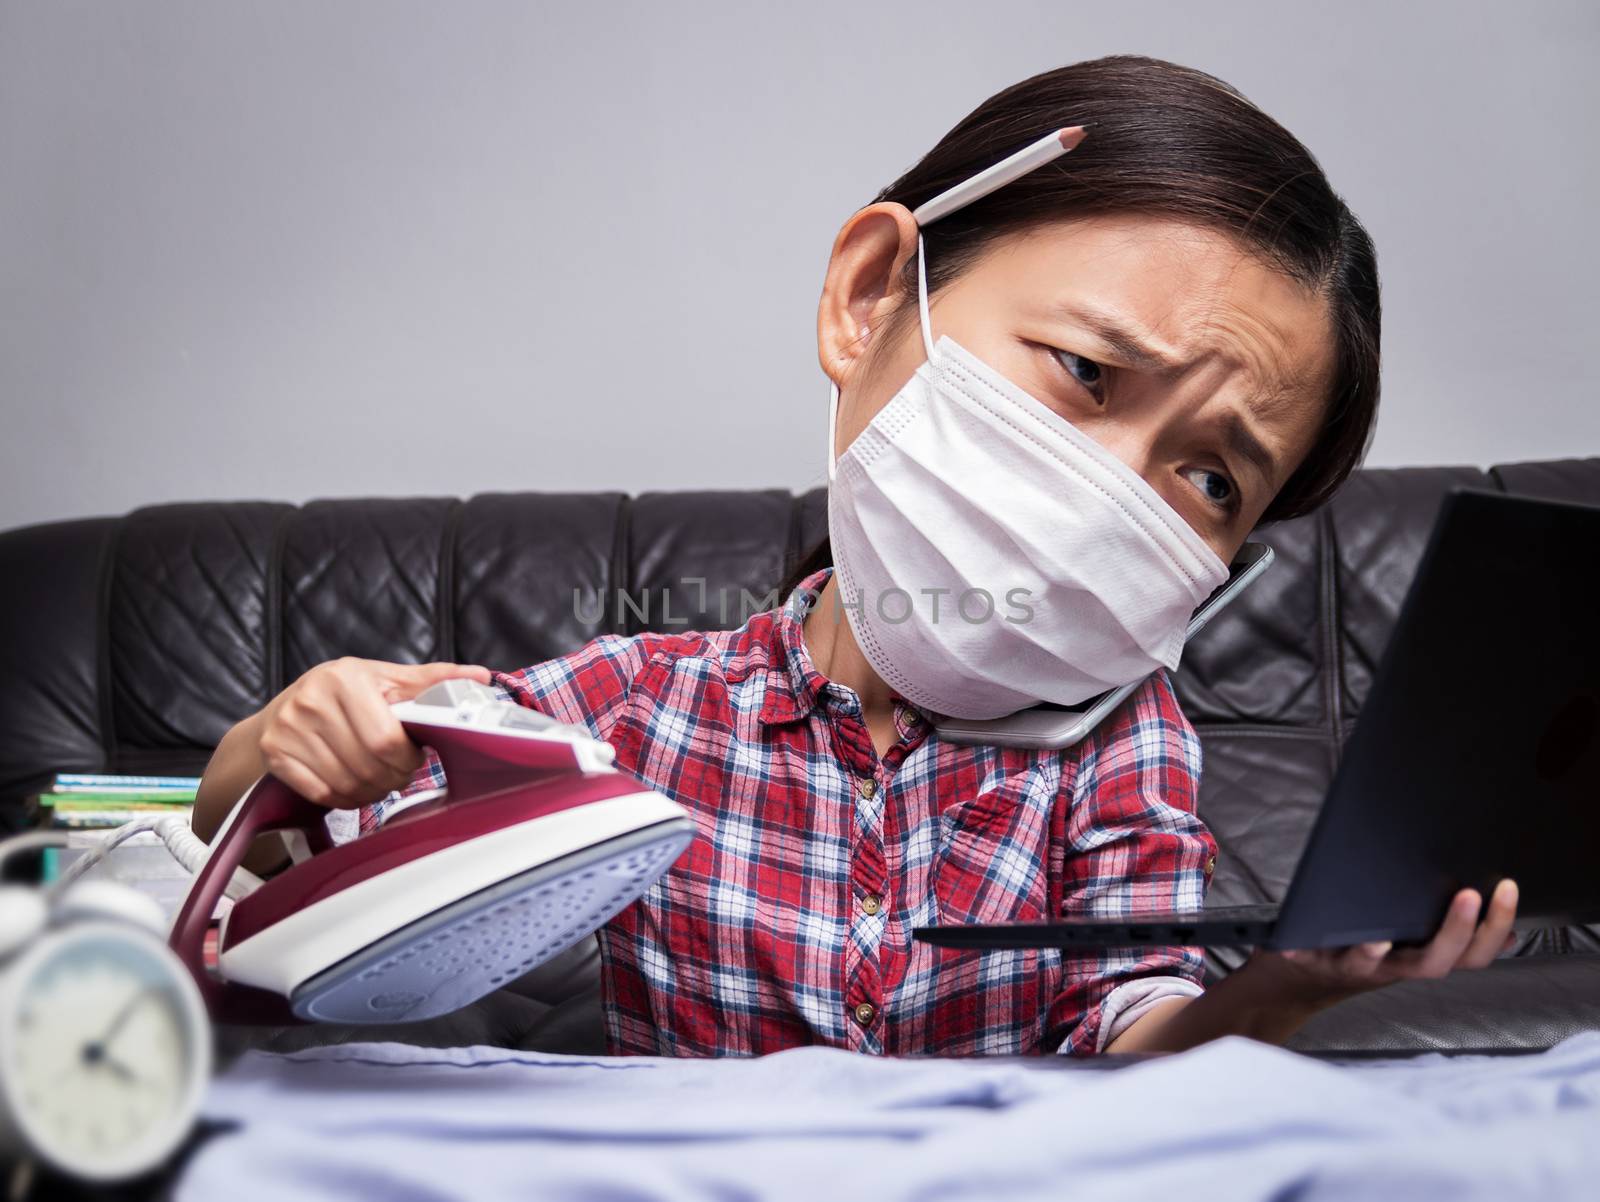 woman working with very busy business and housework part, ironing cloth, talking on phone and working with laptop during self isolation to avoid spreading illness transmission of COVID-19 Coronavirus